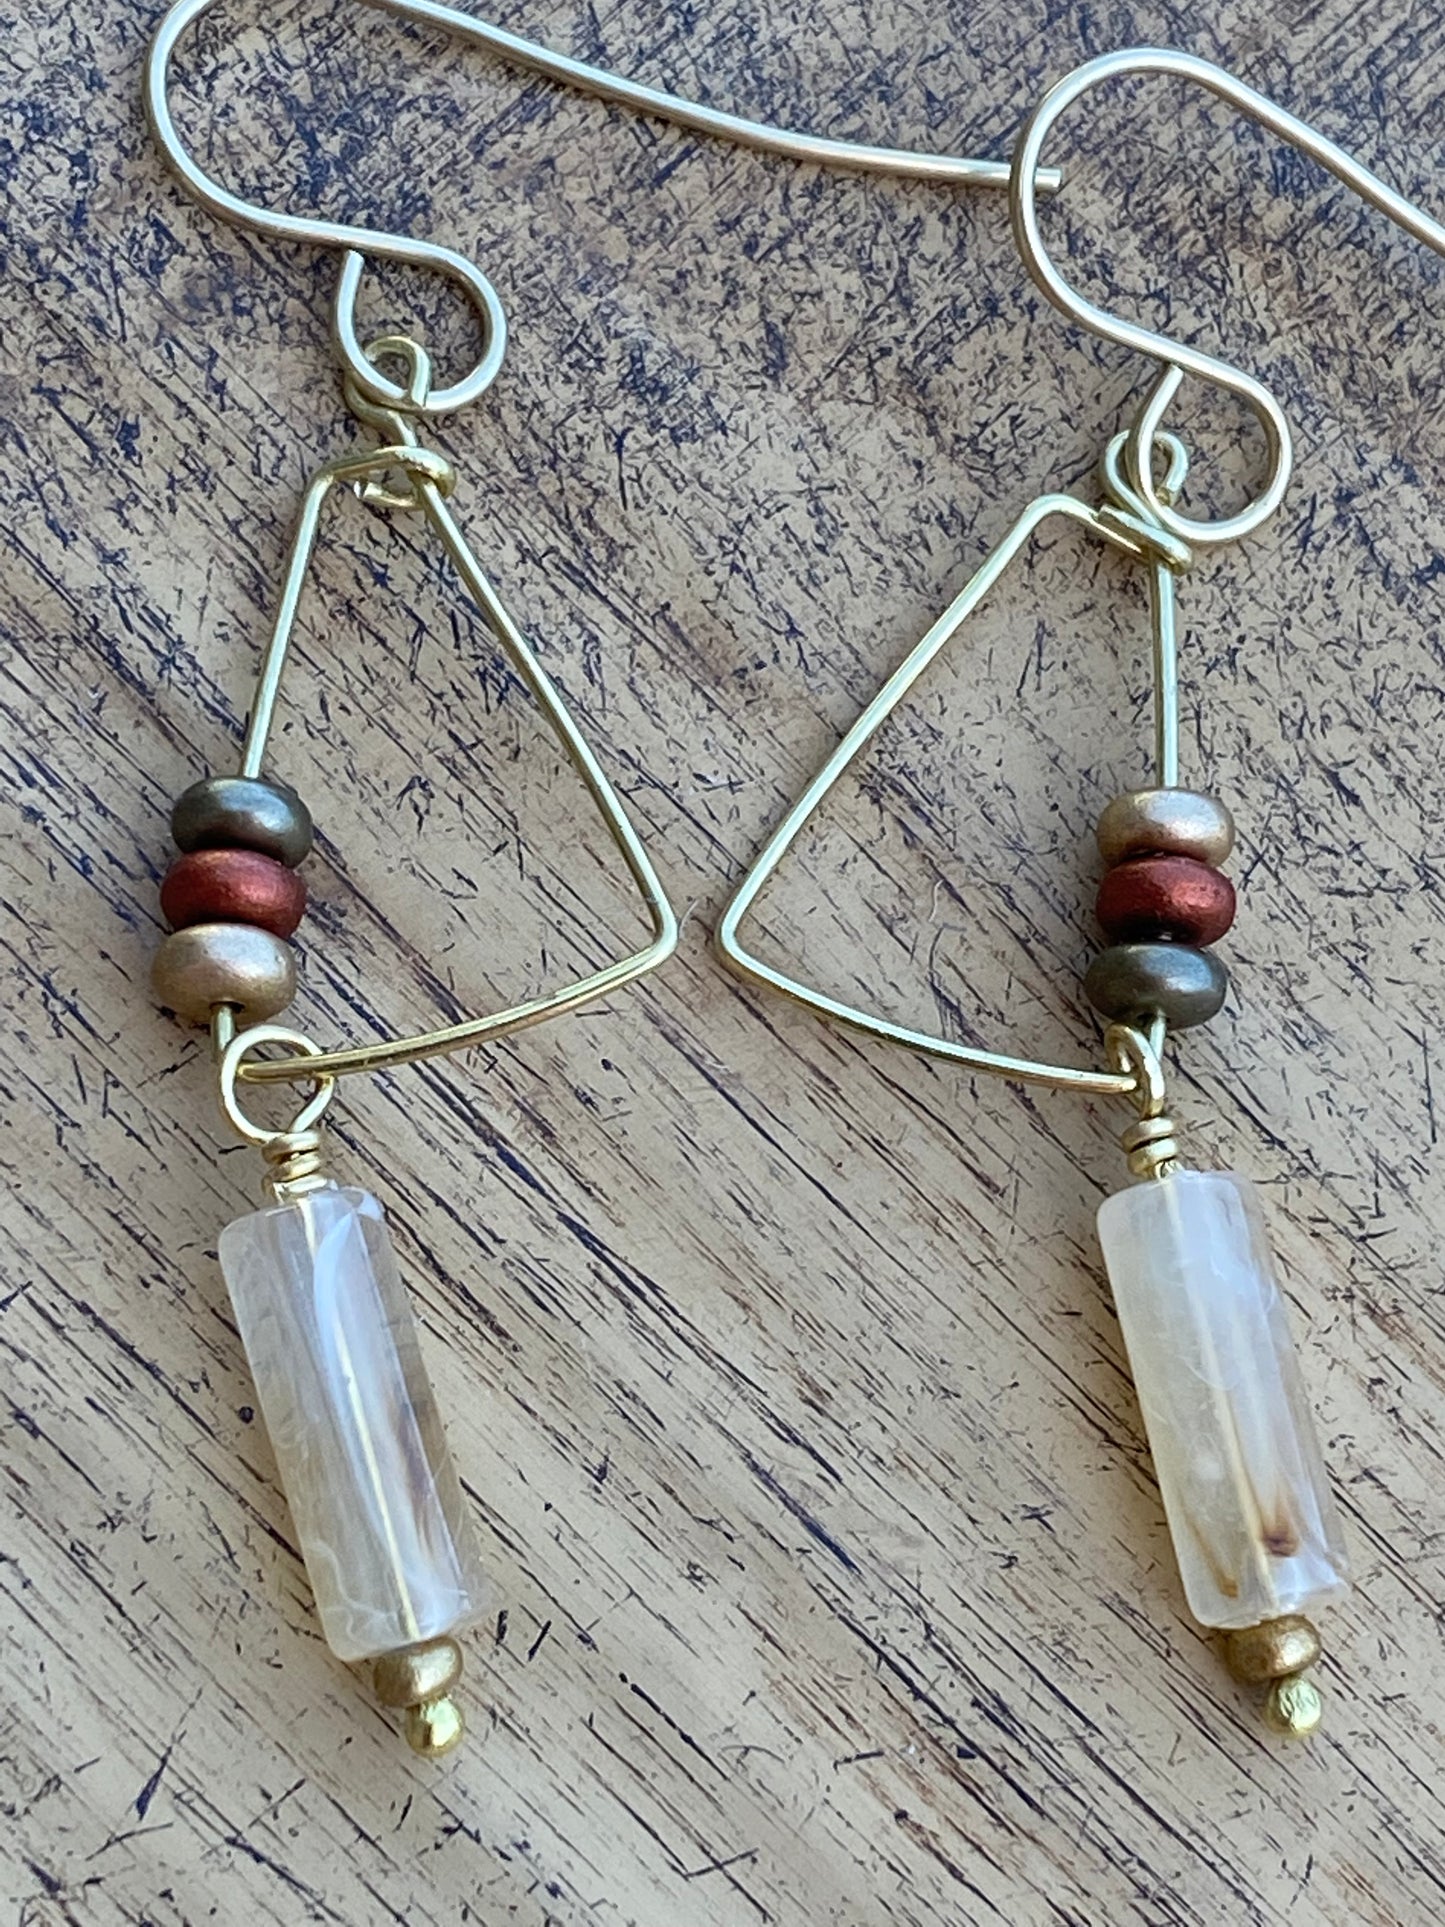 Earrings: Brass Dangles with harlequin quartz  and glass bead accent